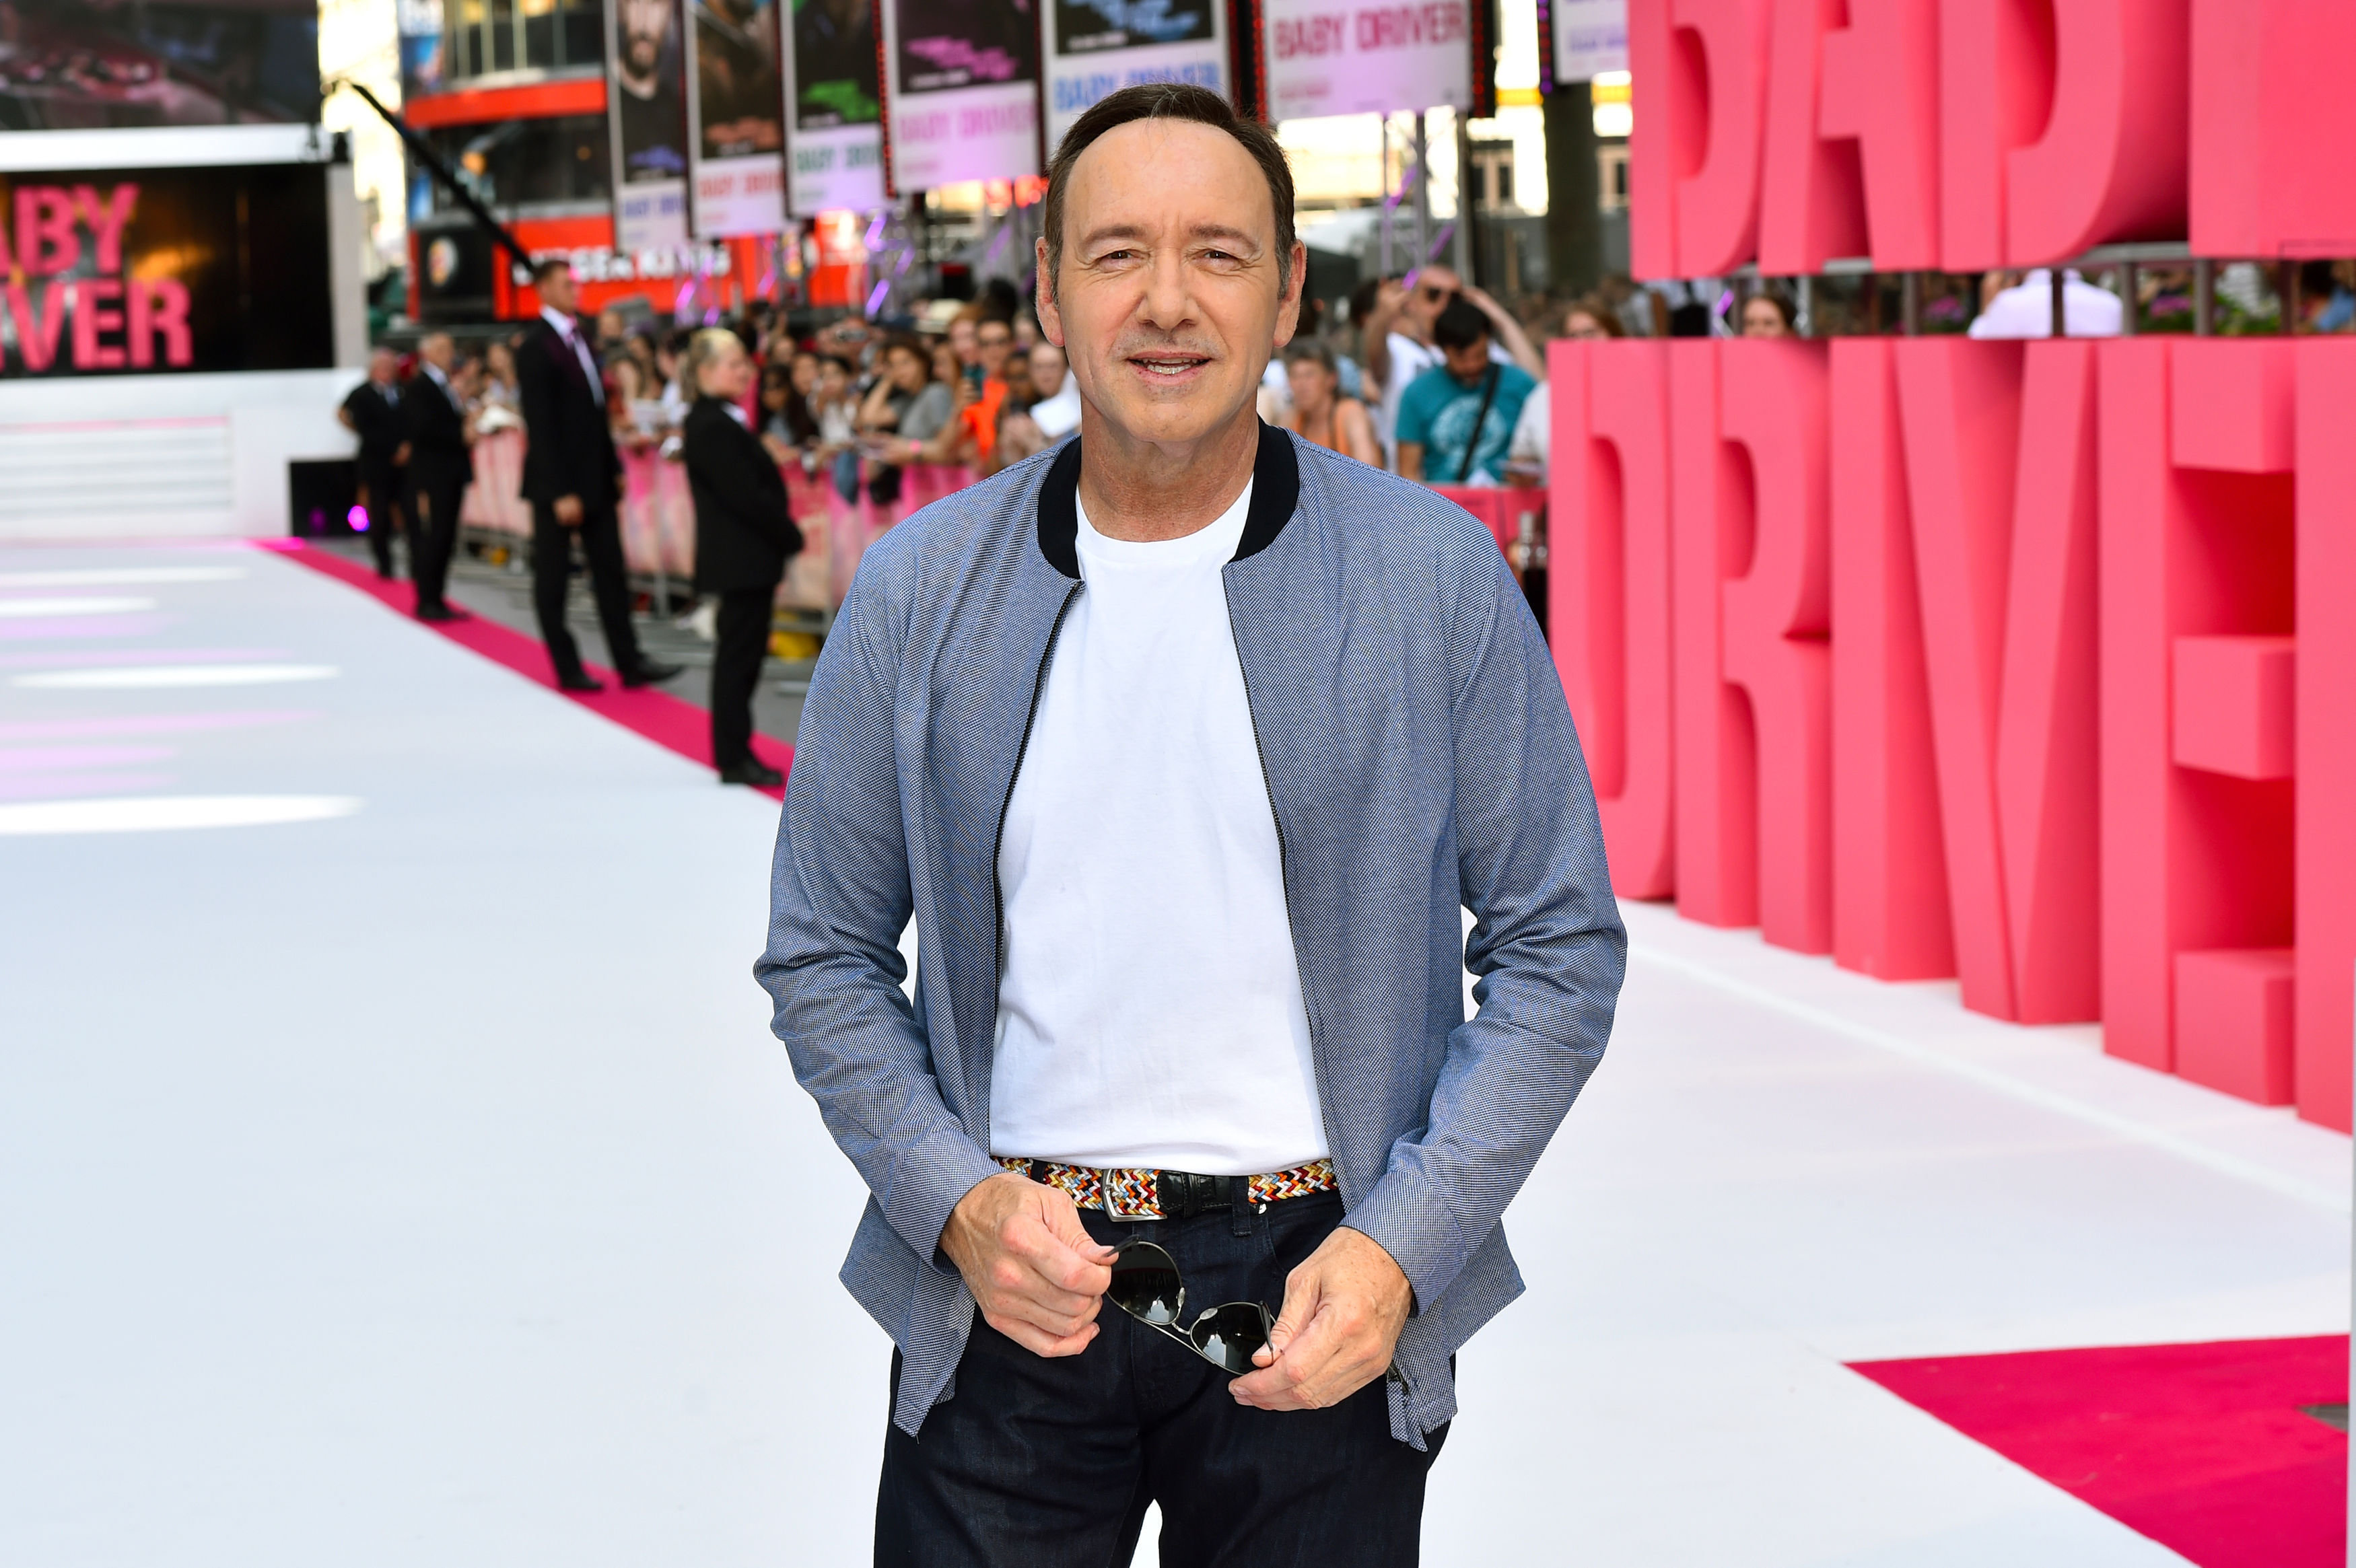 Kevin Spacey&nbsp;has faced